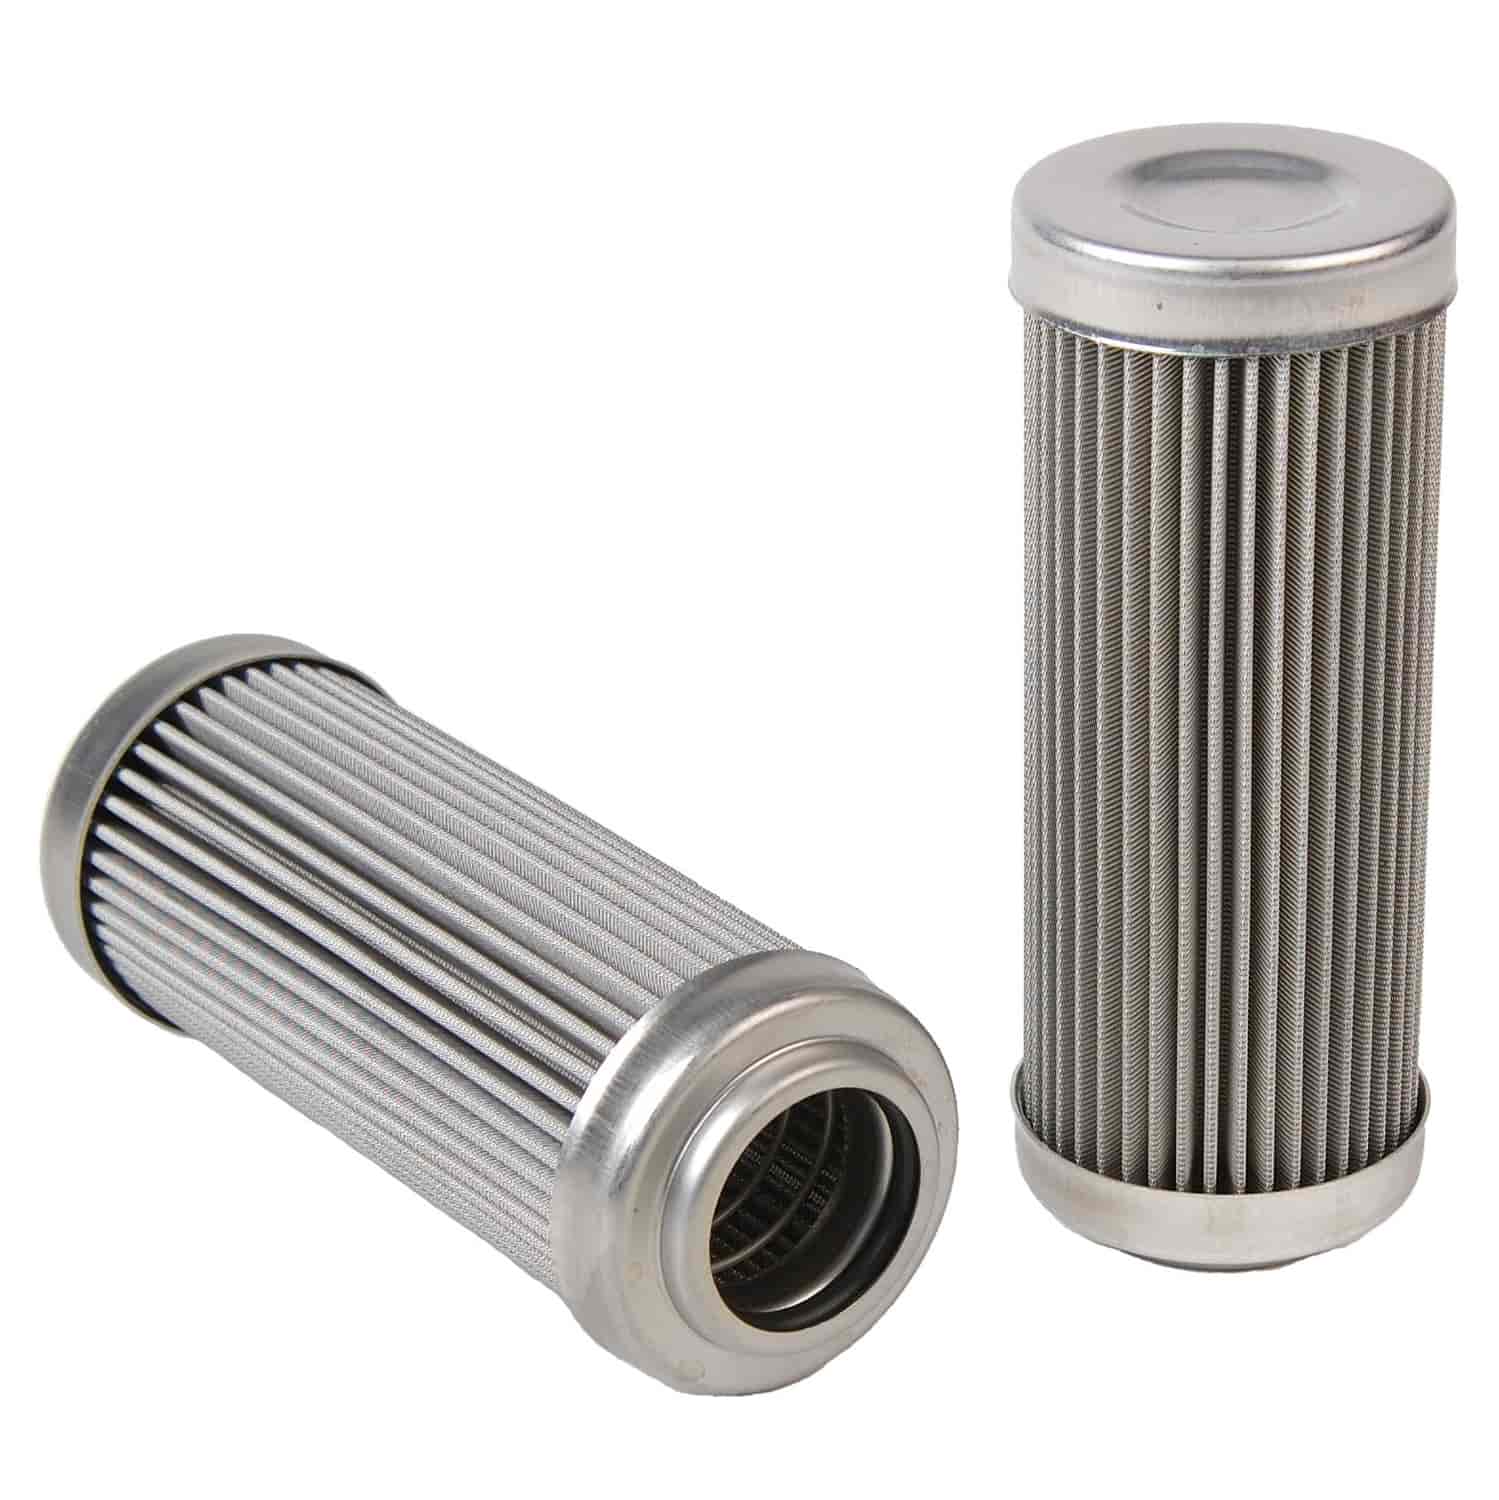 Replacement Fuel Filter Element 100 micron for part #027-12302, 12332, 12309, 12352